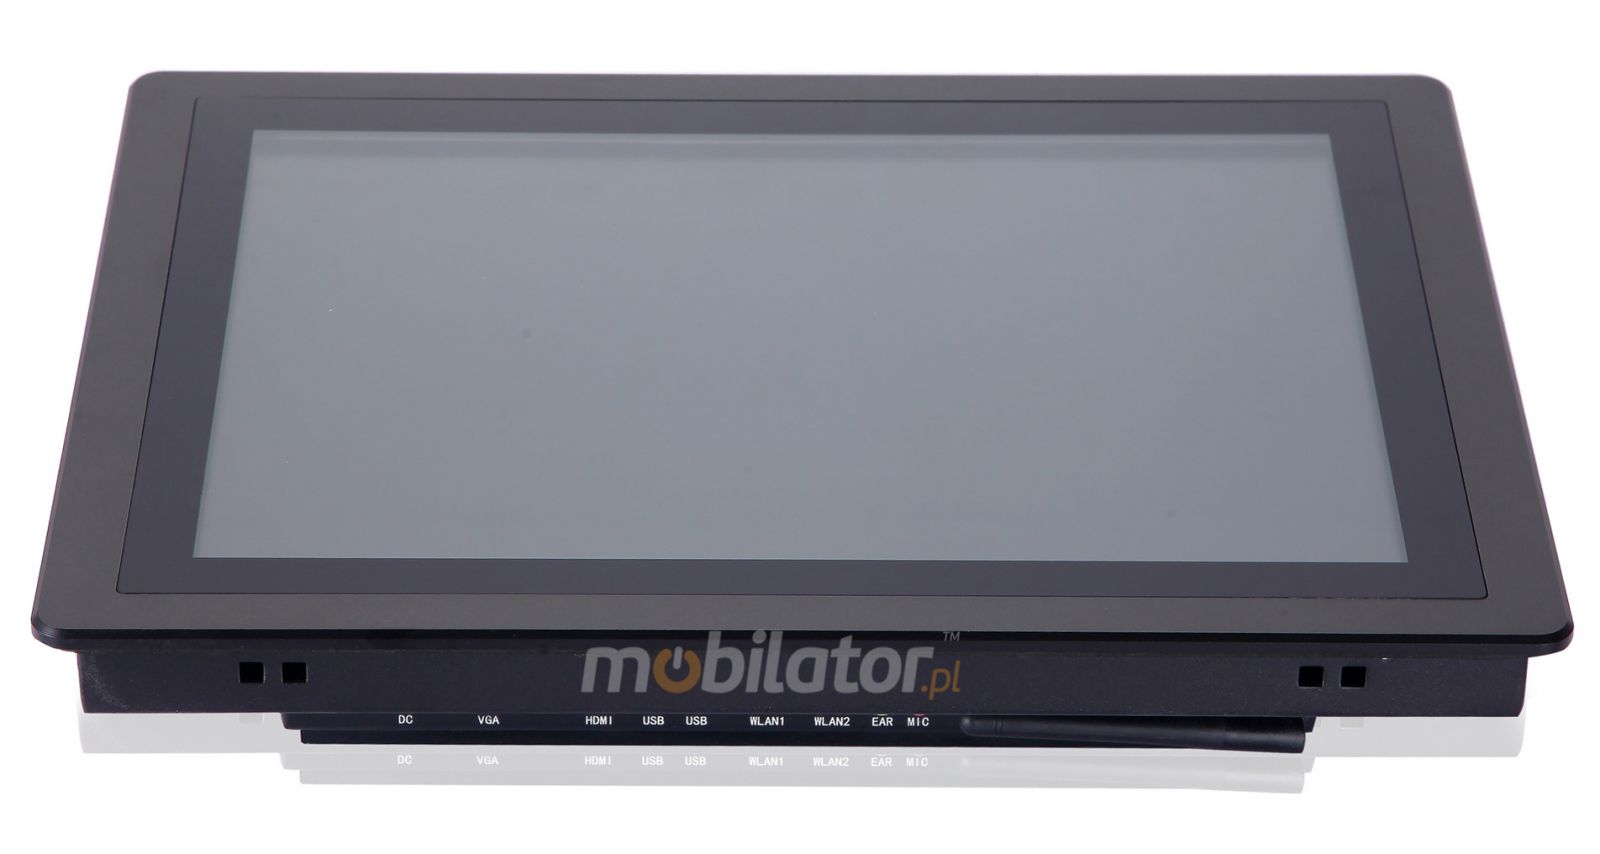 Mobilator Flat Design PCAP CTPC150RD3 LED panel, 10 points touch screen, built-in WIFI, 12V DC input